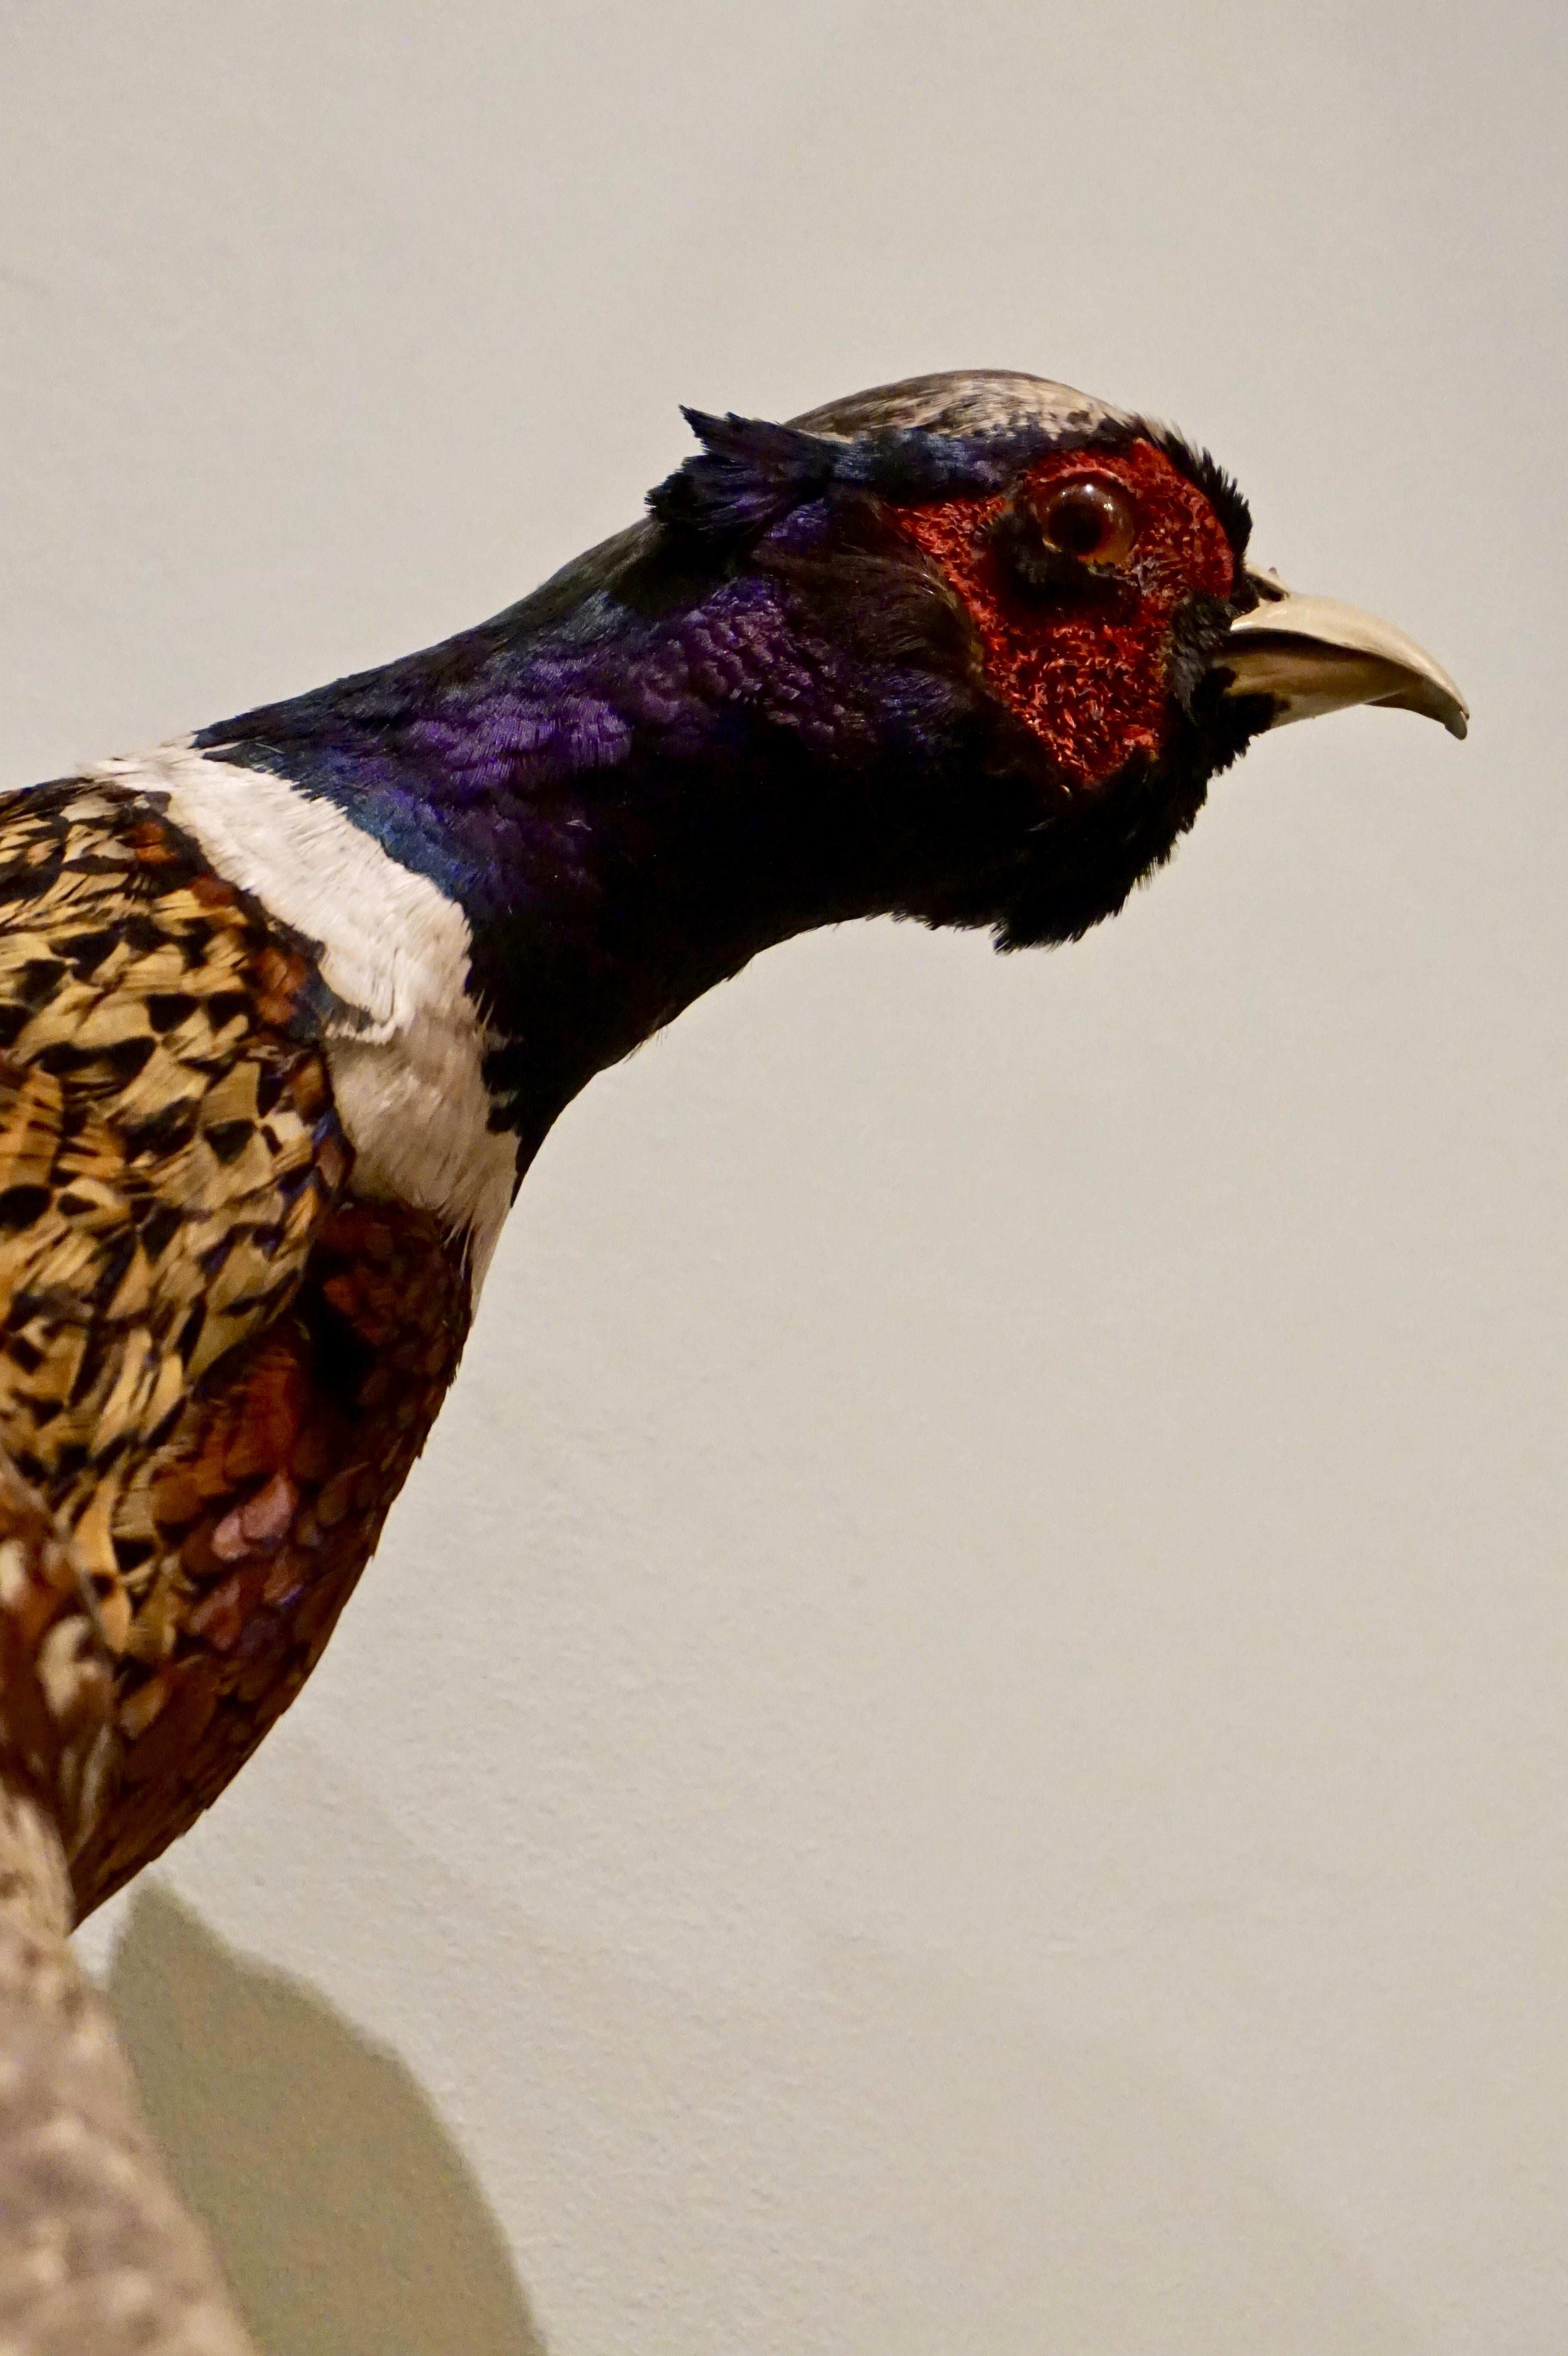 Early 20th Century 1900's Large Rare Chinese Ring Necked Long Tailed Pheasant Taxidermy For Sale